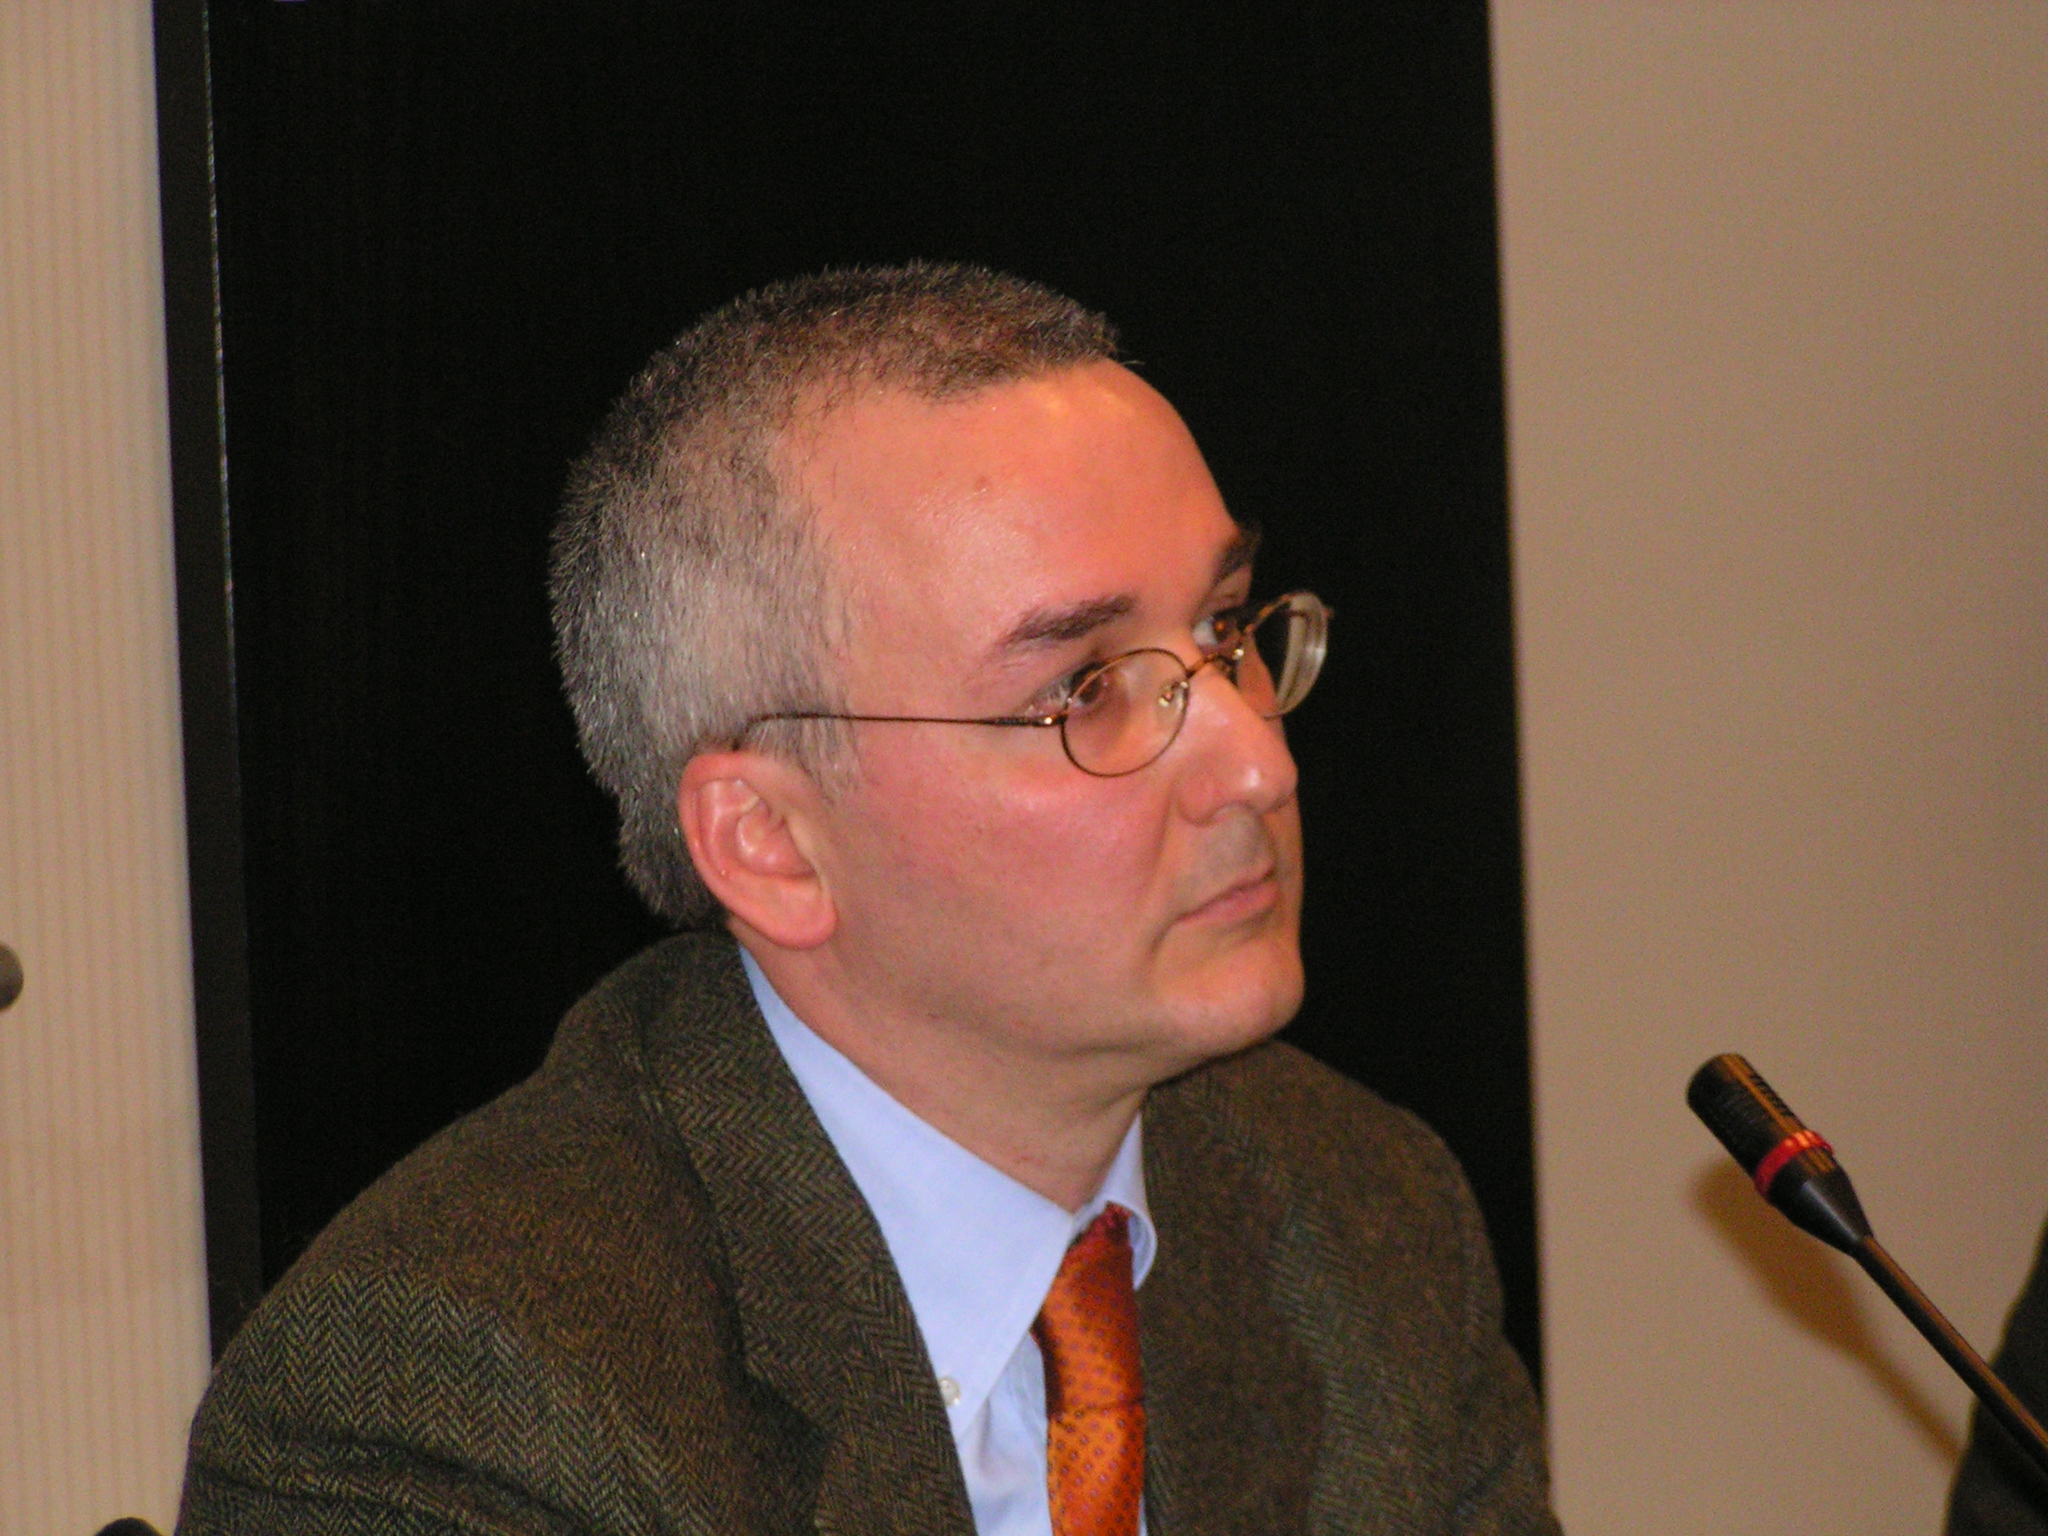 a man wearing glasses and a suit sitting in front of a microphone